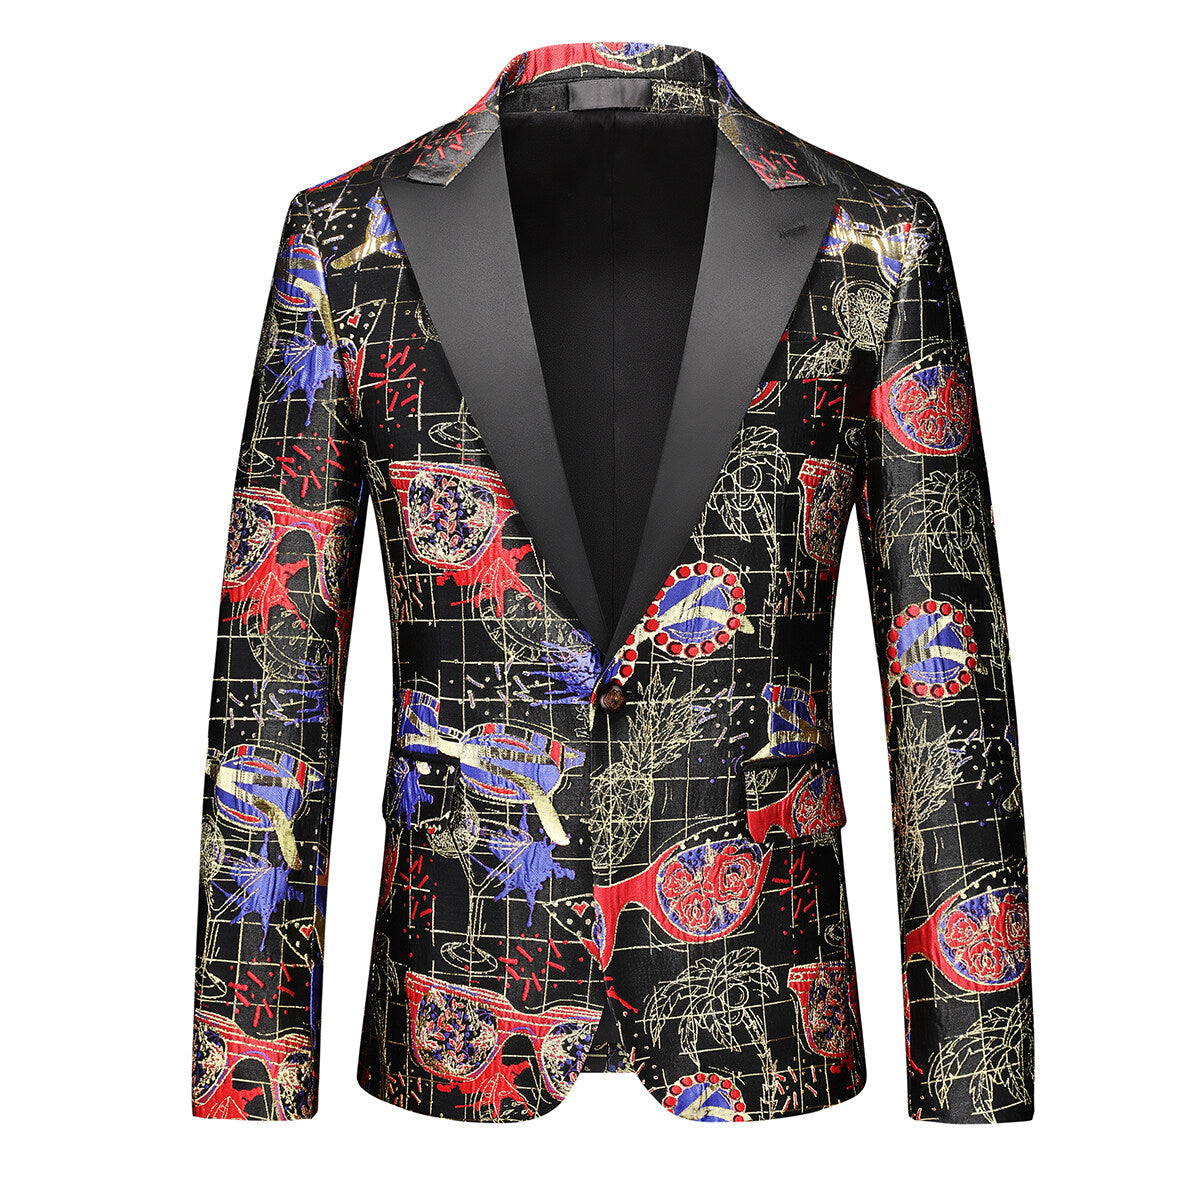 Men's 2-piece Single-breasted Printed Business Suit Red